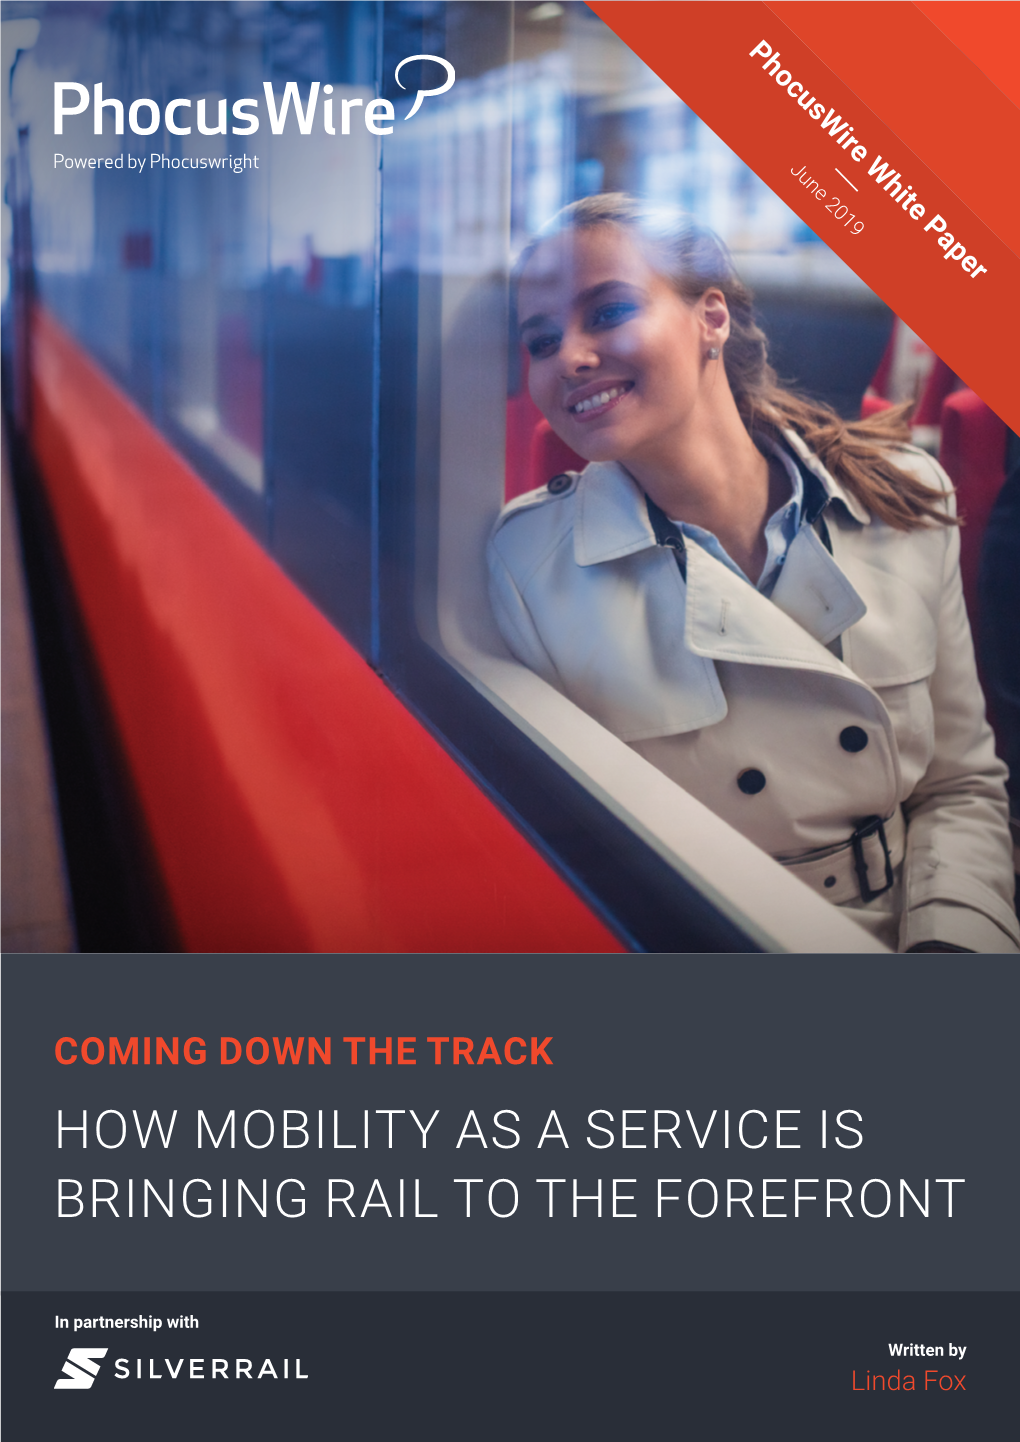 How Mobility As a Service Is Bringing Rail to the Forefront